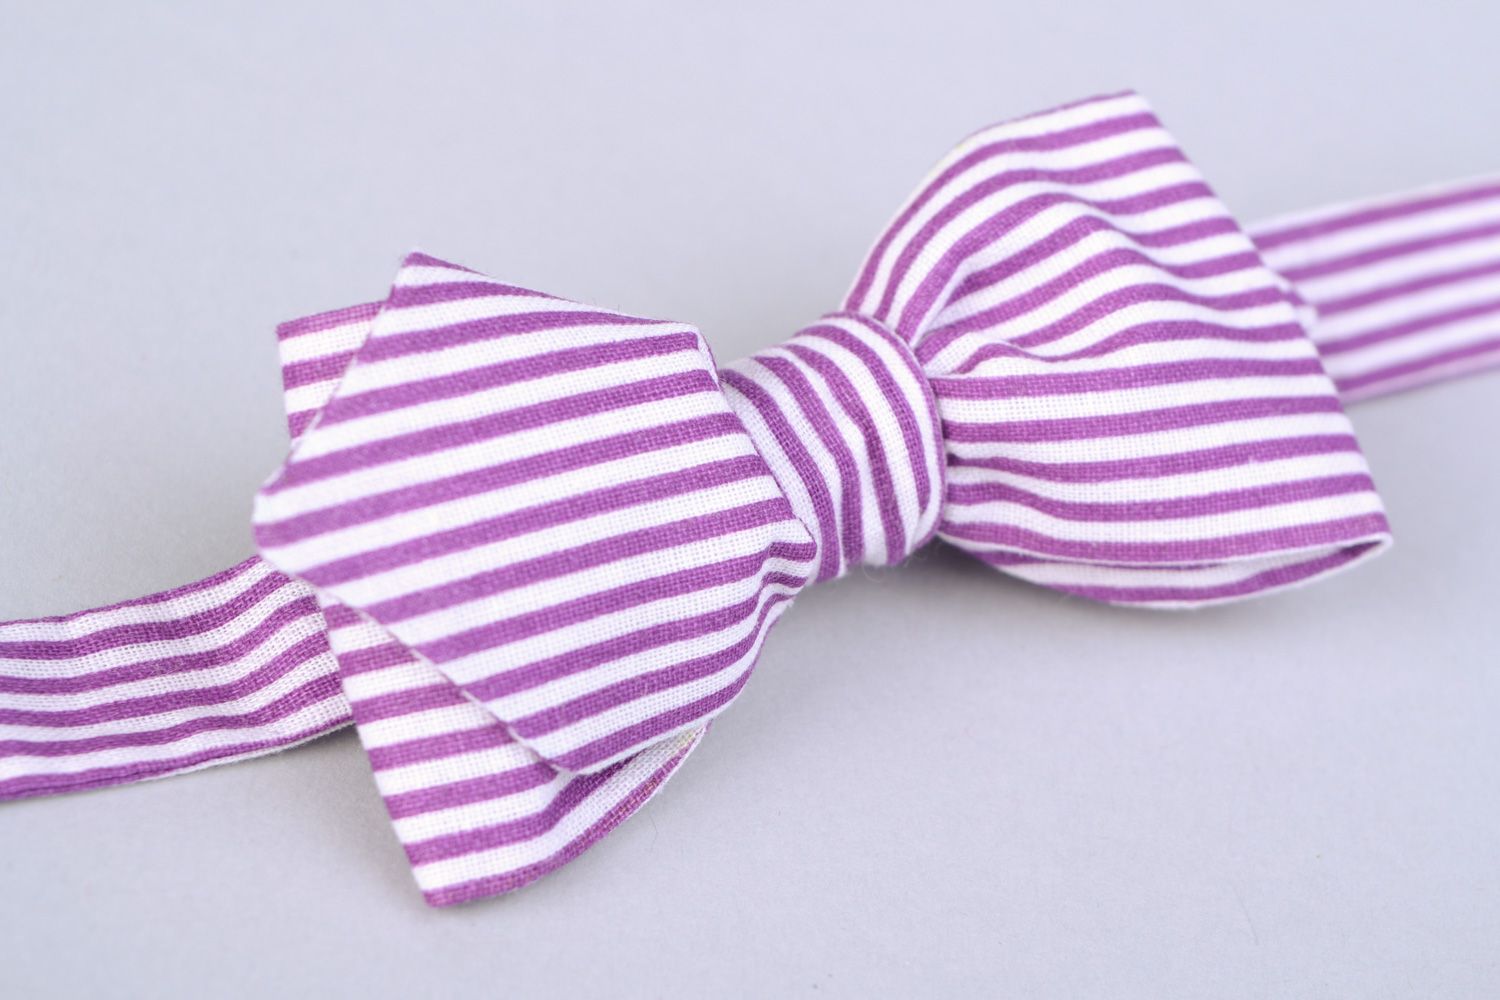 Handmade designer bow tie sewn of striped white and violet cotton fabric for men photo 4